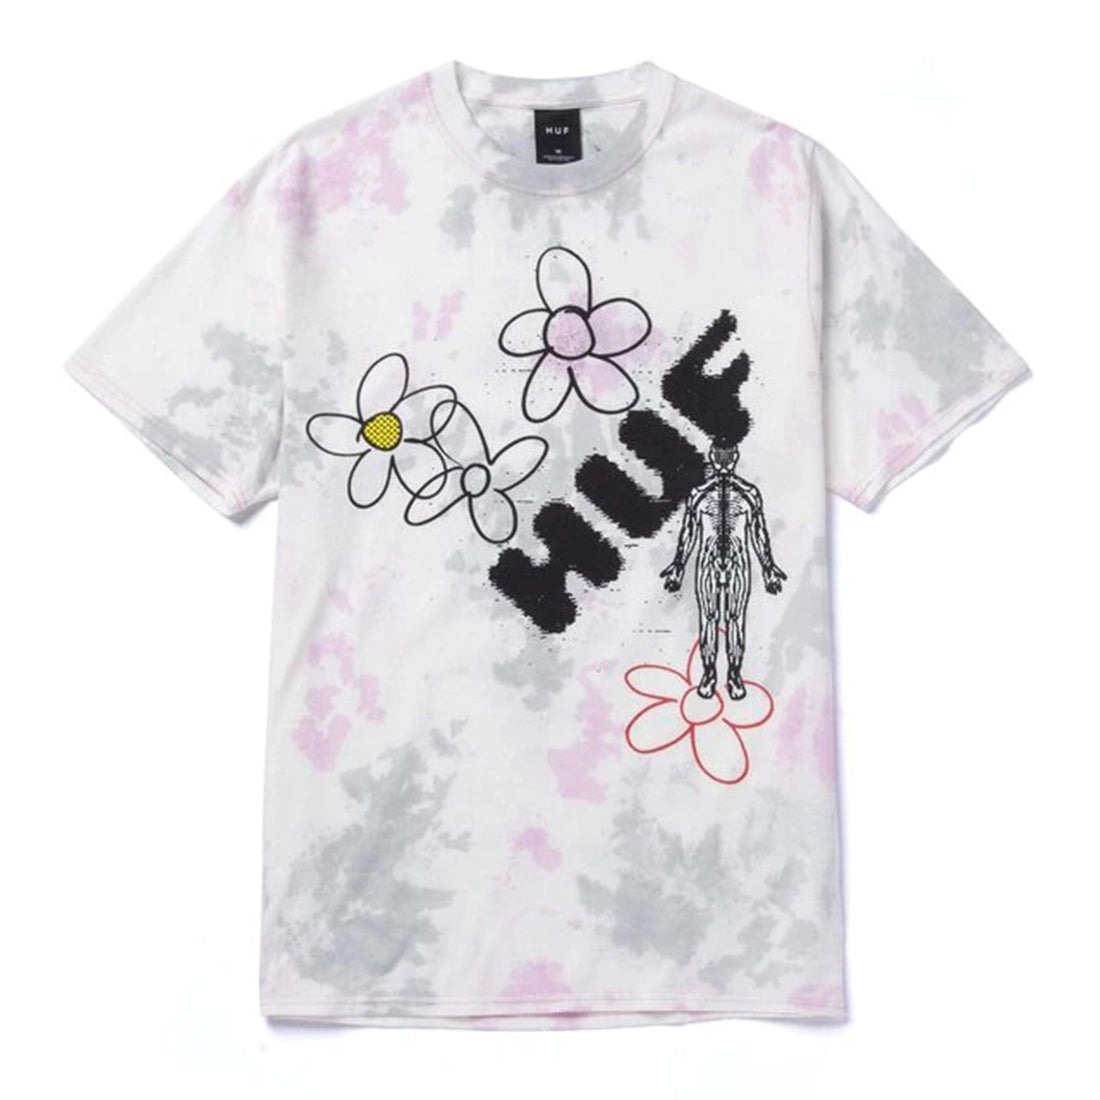 Outerbody S/S Tee W